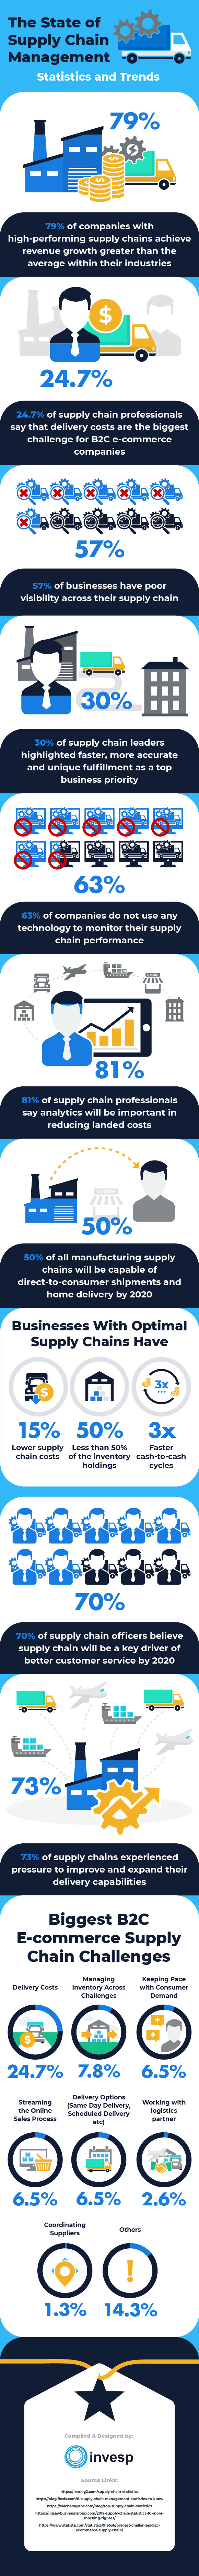 The State of Supply Chain Management – Statistics and Trends